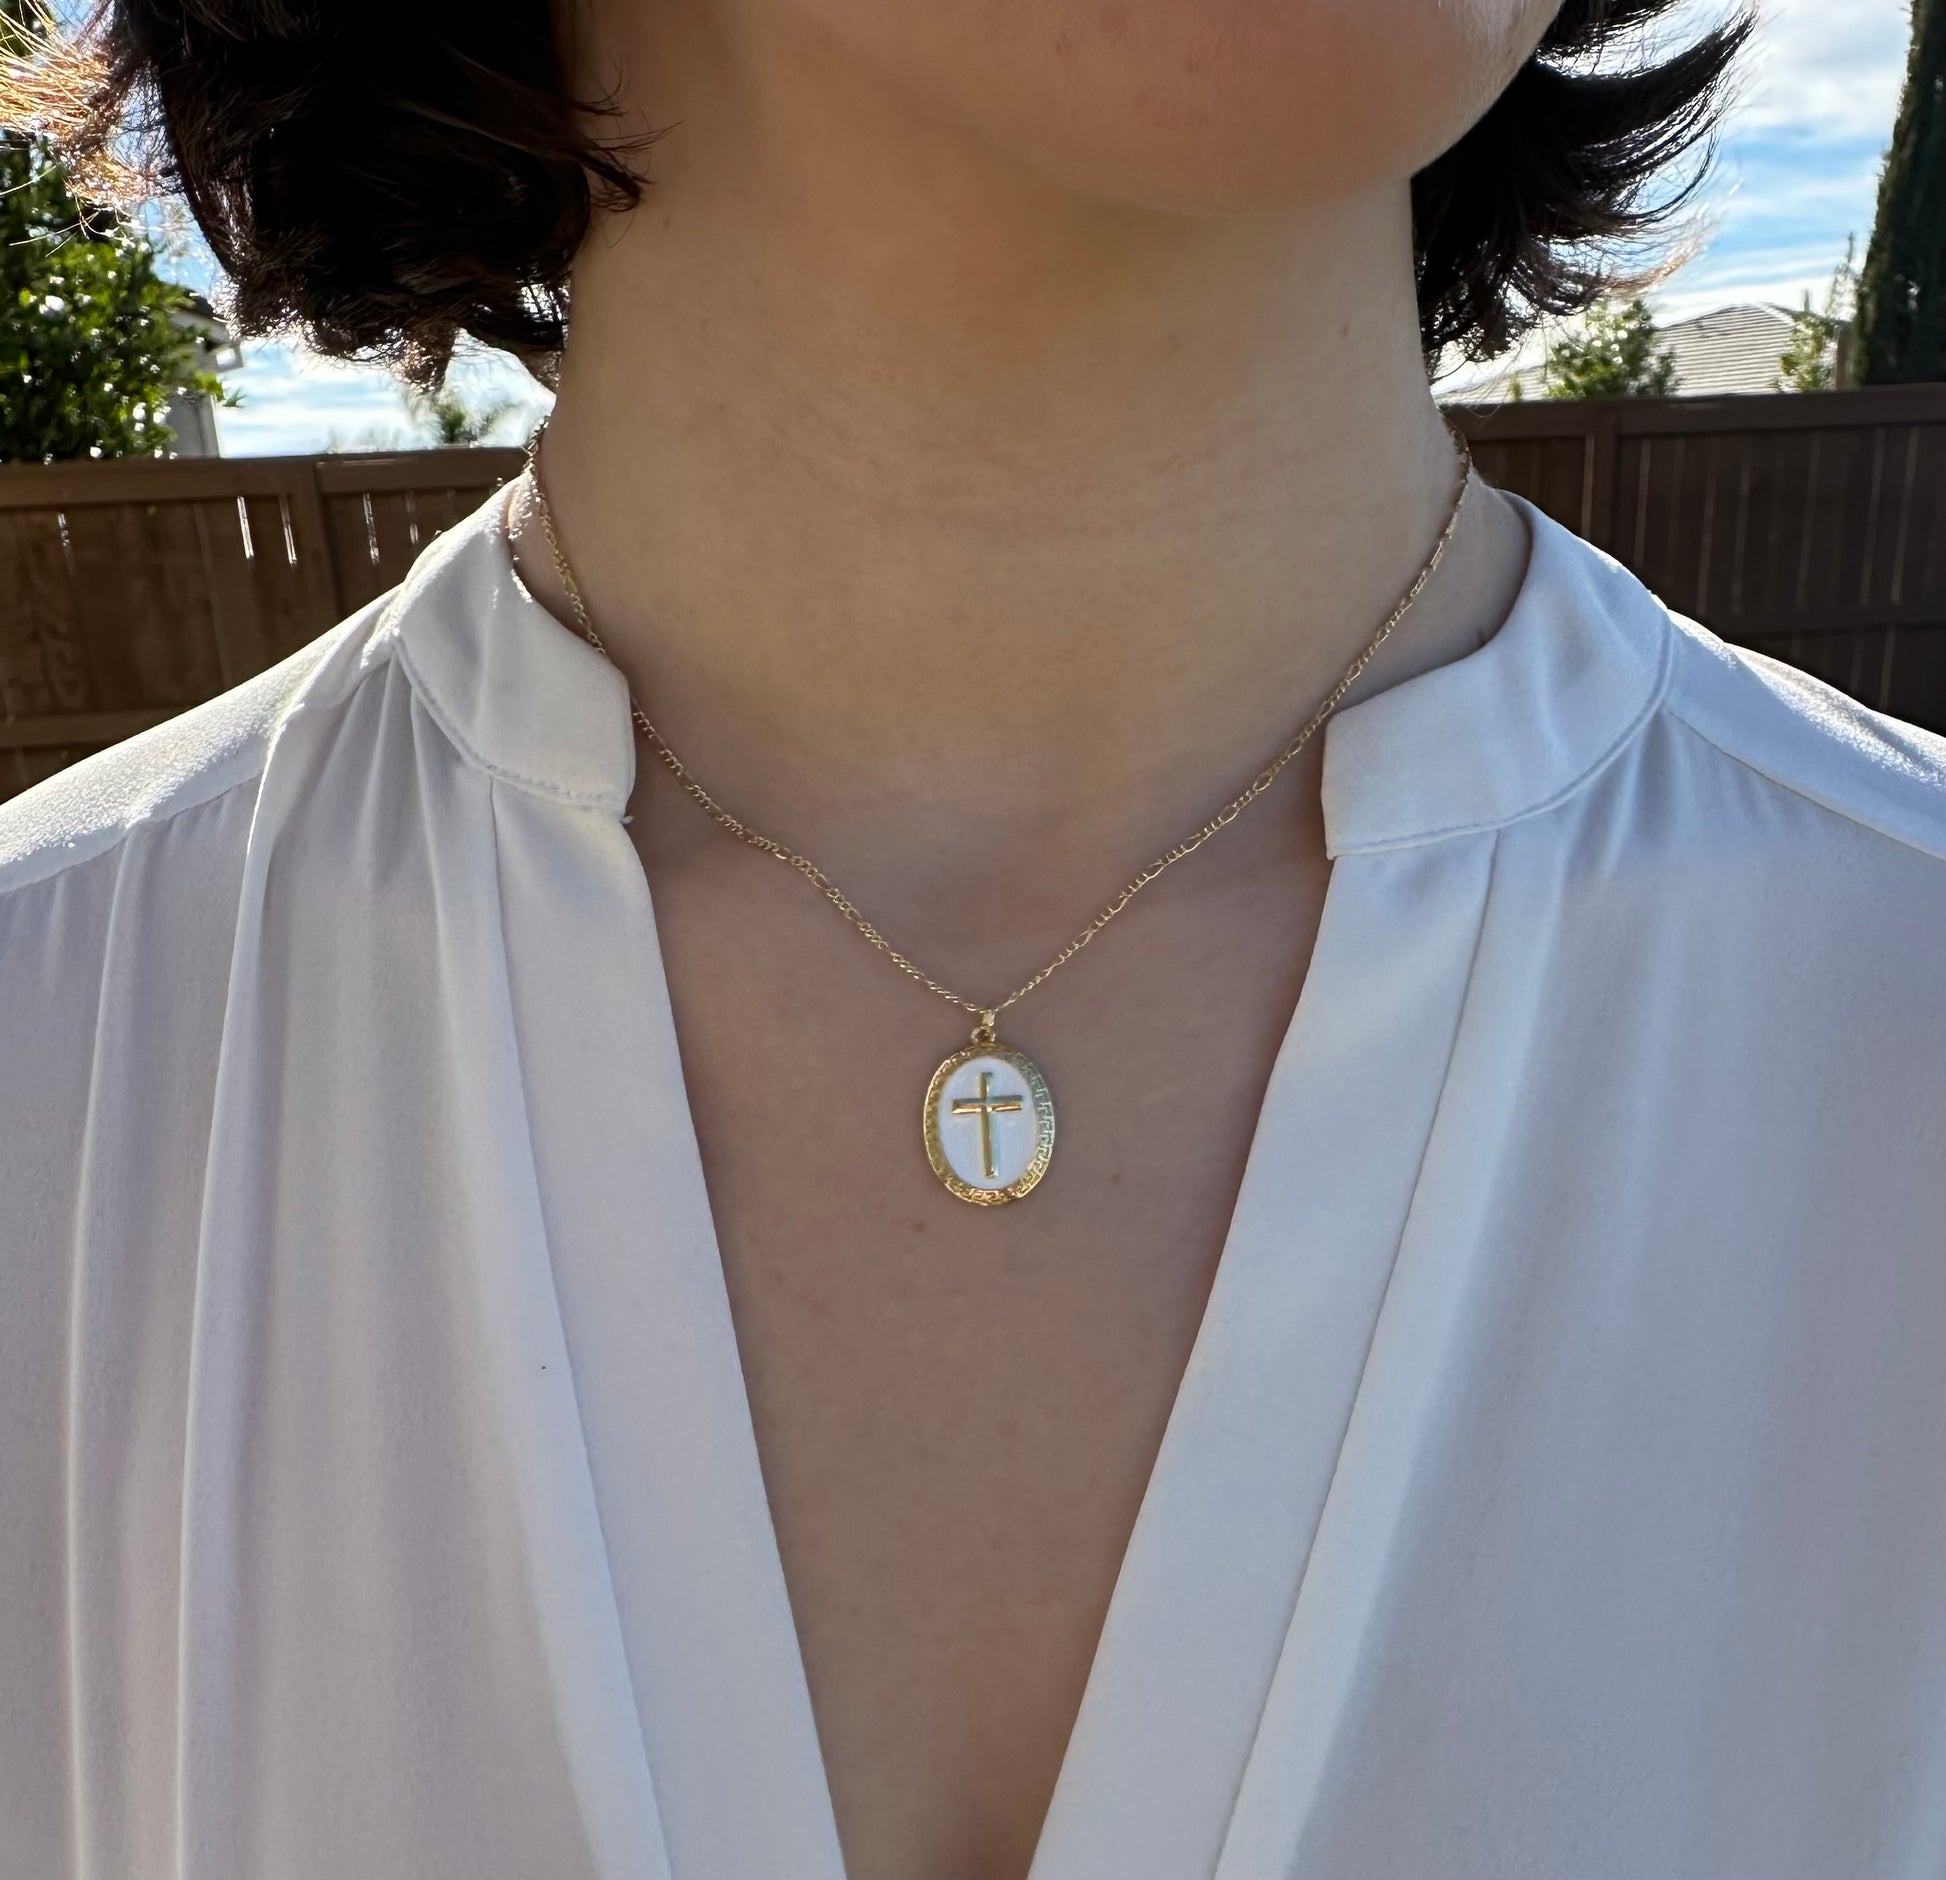 dainty cross necklace, gold cross necklace, religious necklace, gold necklace, christian jewelry, catholic jewelry, christian gifts, catholic gifts, catholic gift for her, first communion gift, baptism gift, wedding gift, christian wedding, bridesmaid gift, catholic gift for her, confirmation gift